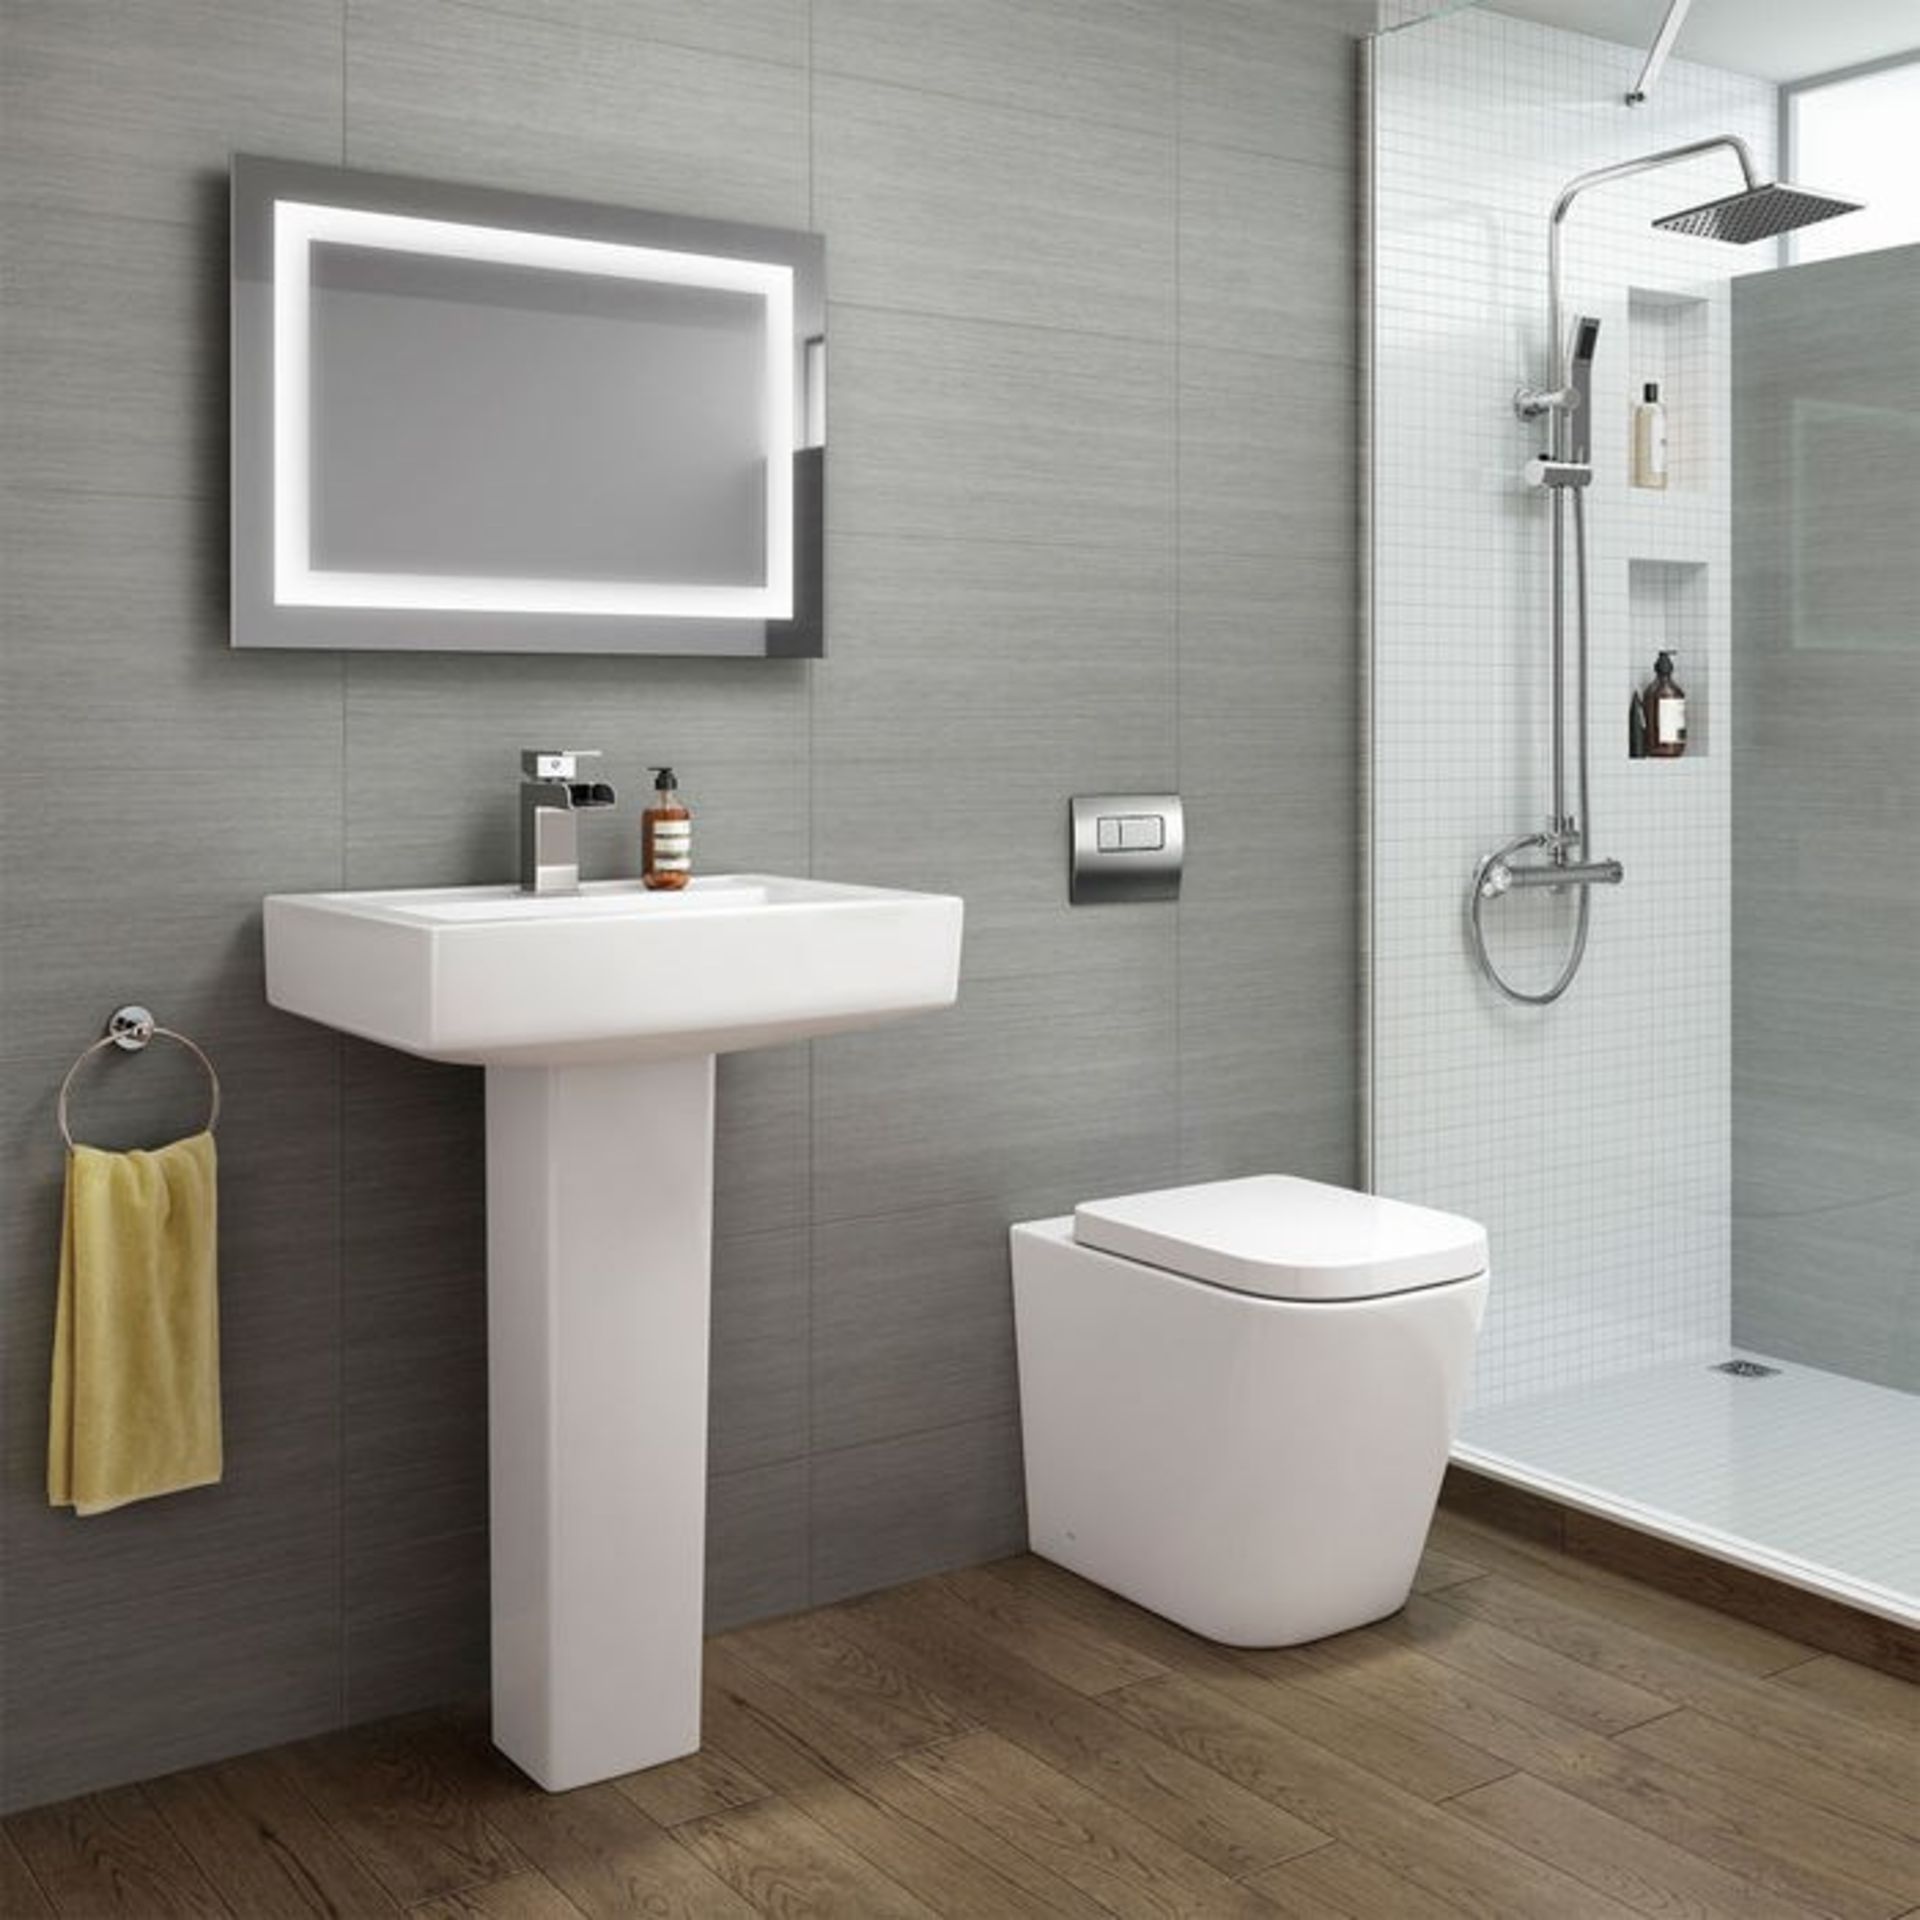 Florence Rimless Back to Wall Toilet inc Luxury Soft Close Seat Rimless design makes it easy to... - Image 3 of 3